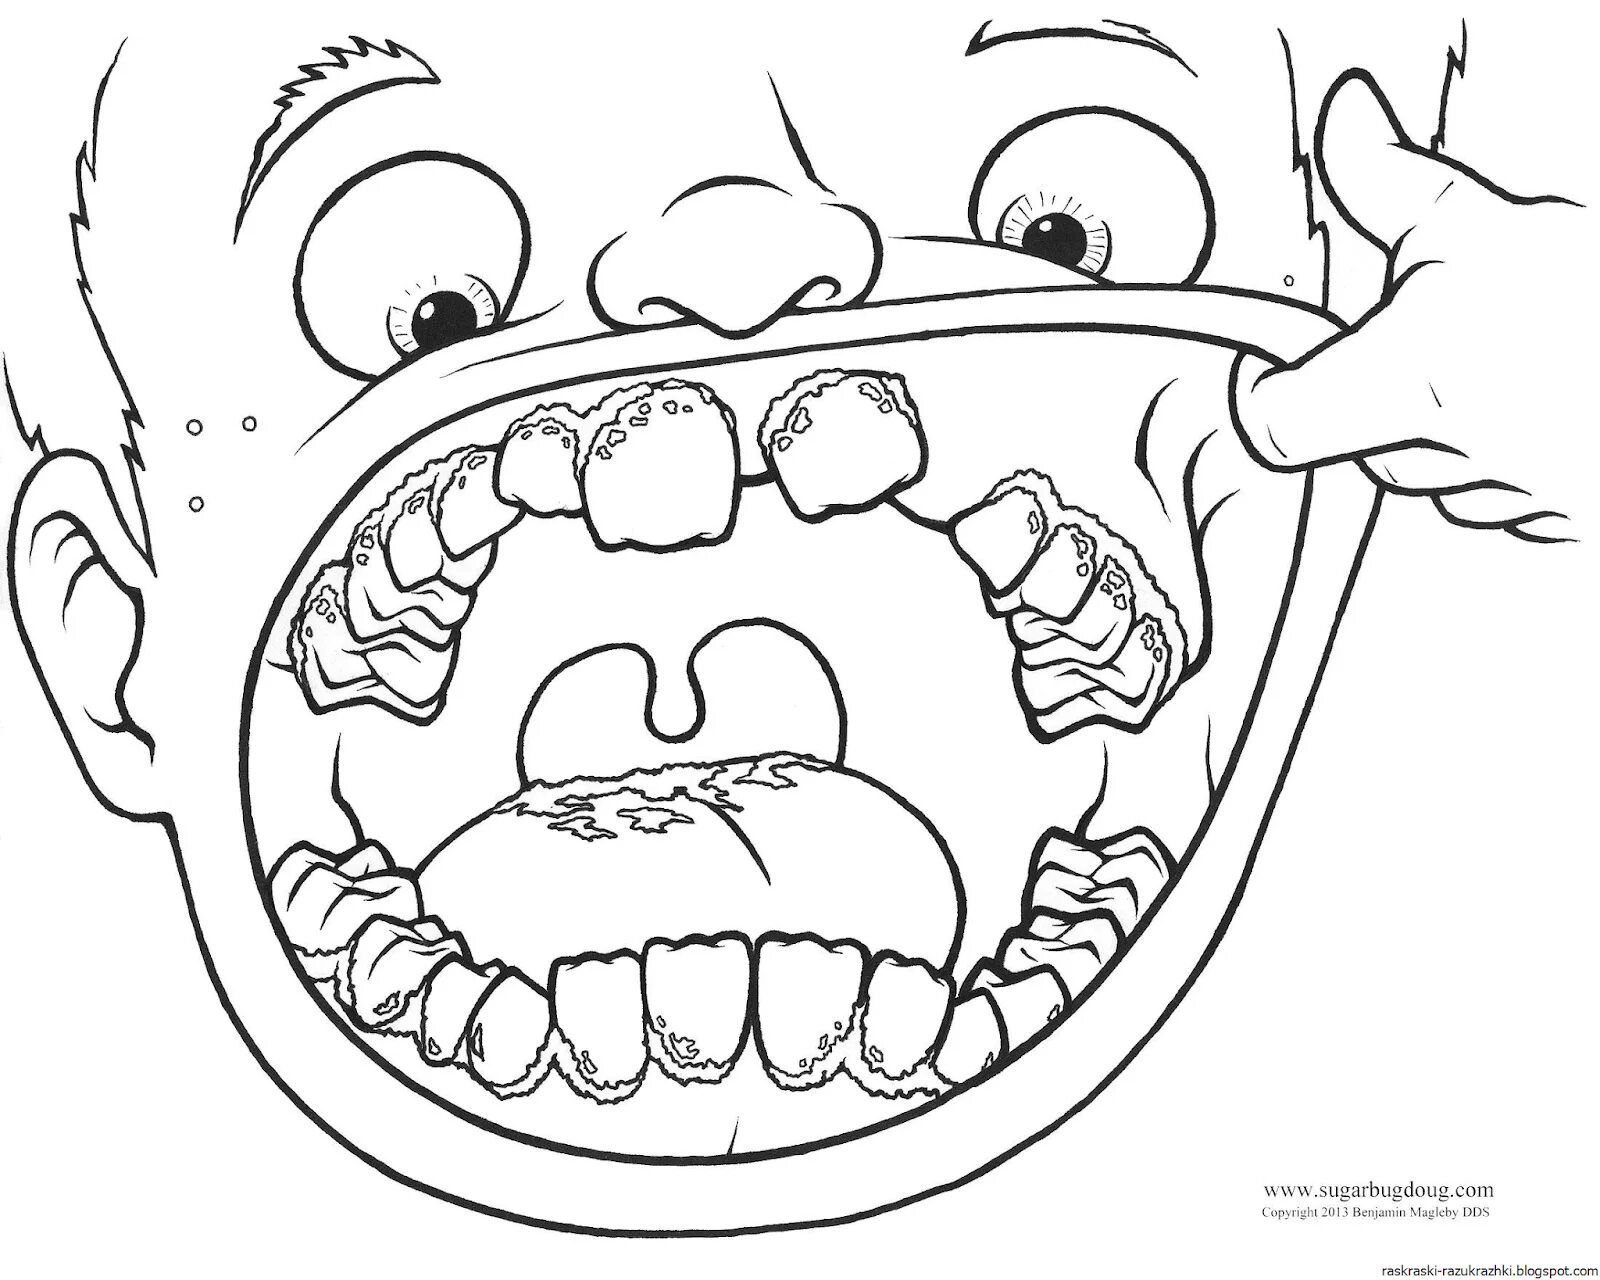 Color-vibrant dentistry coloring page